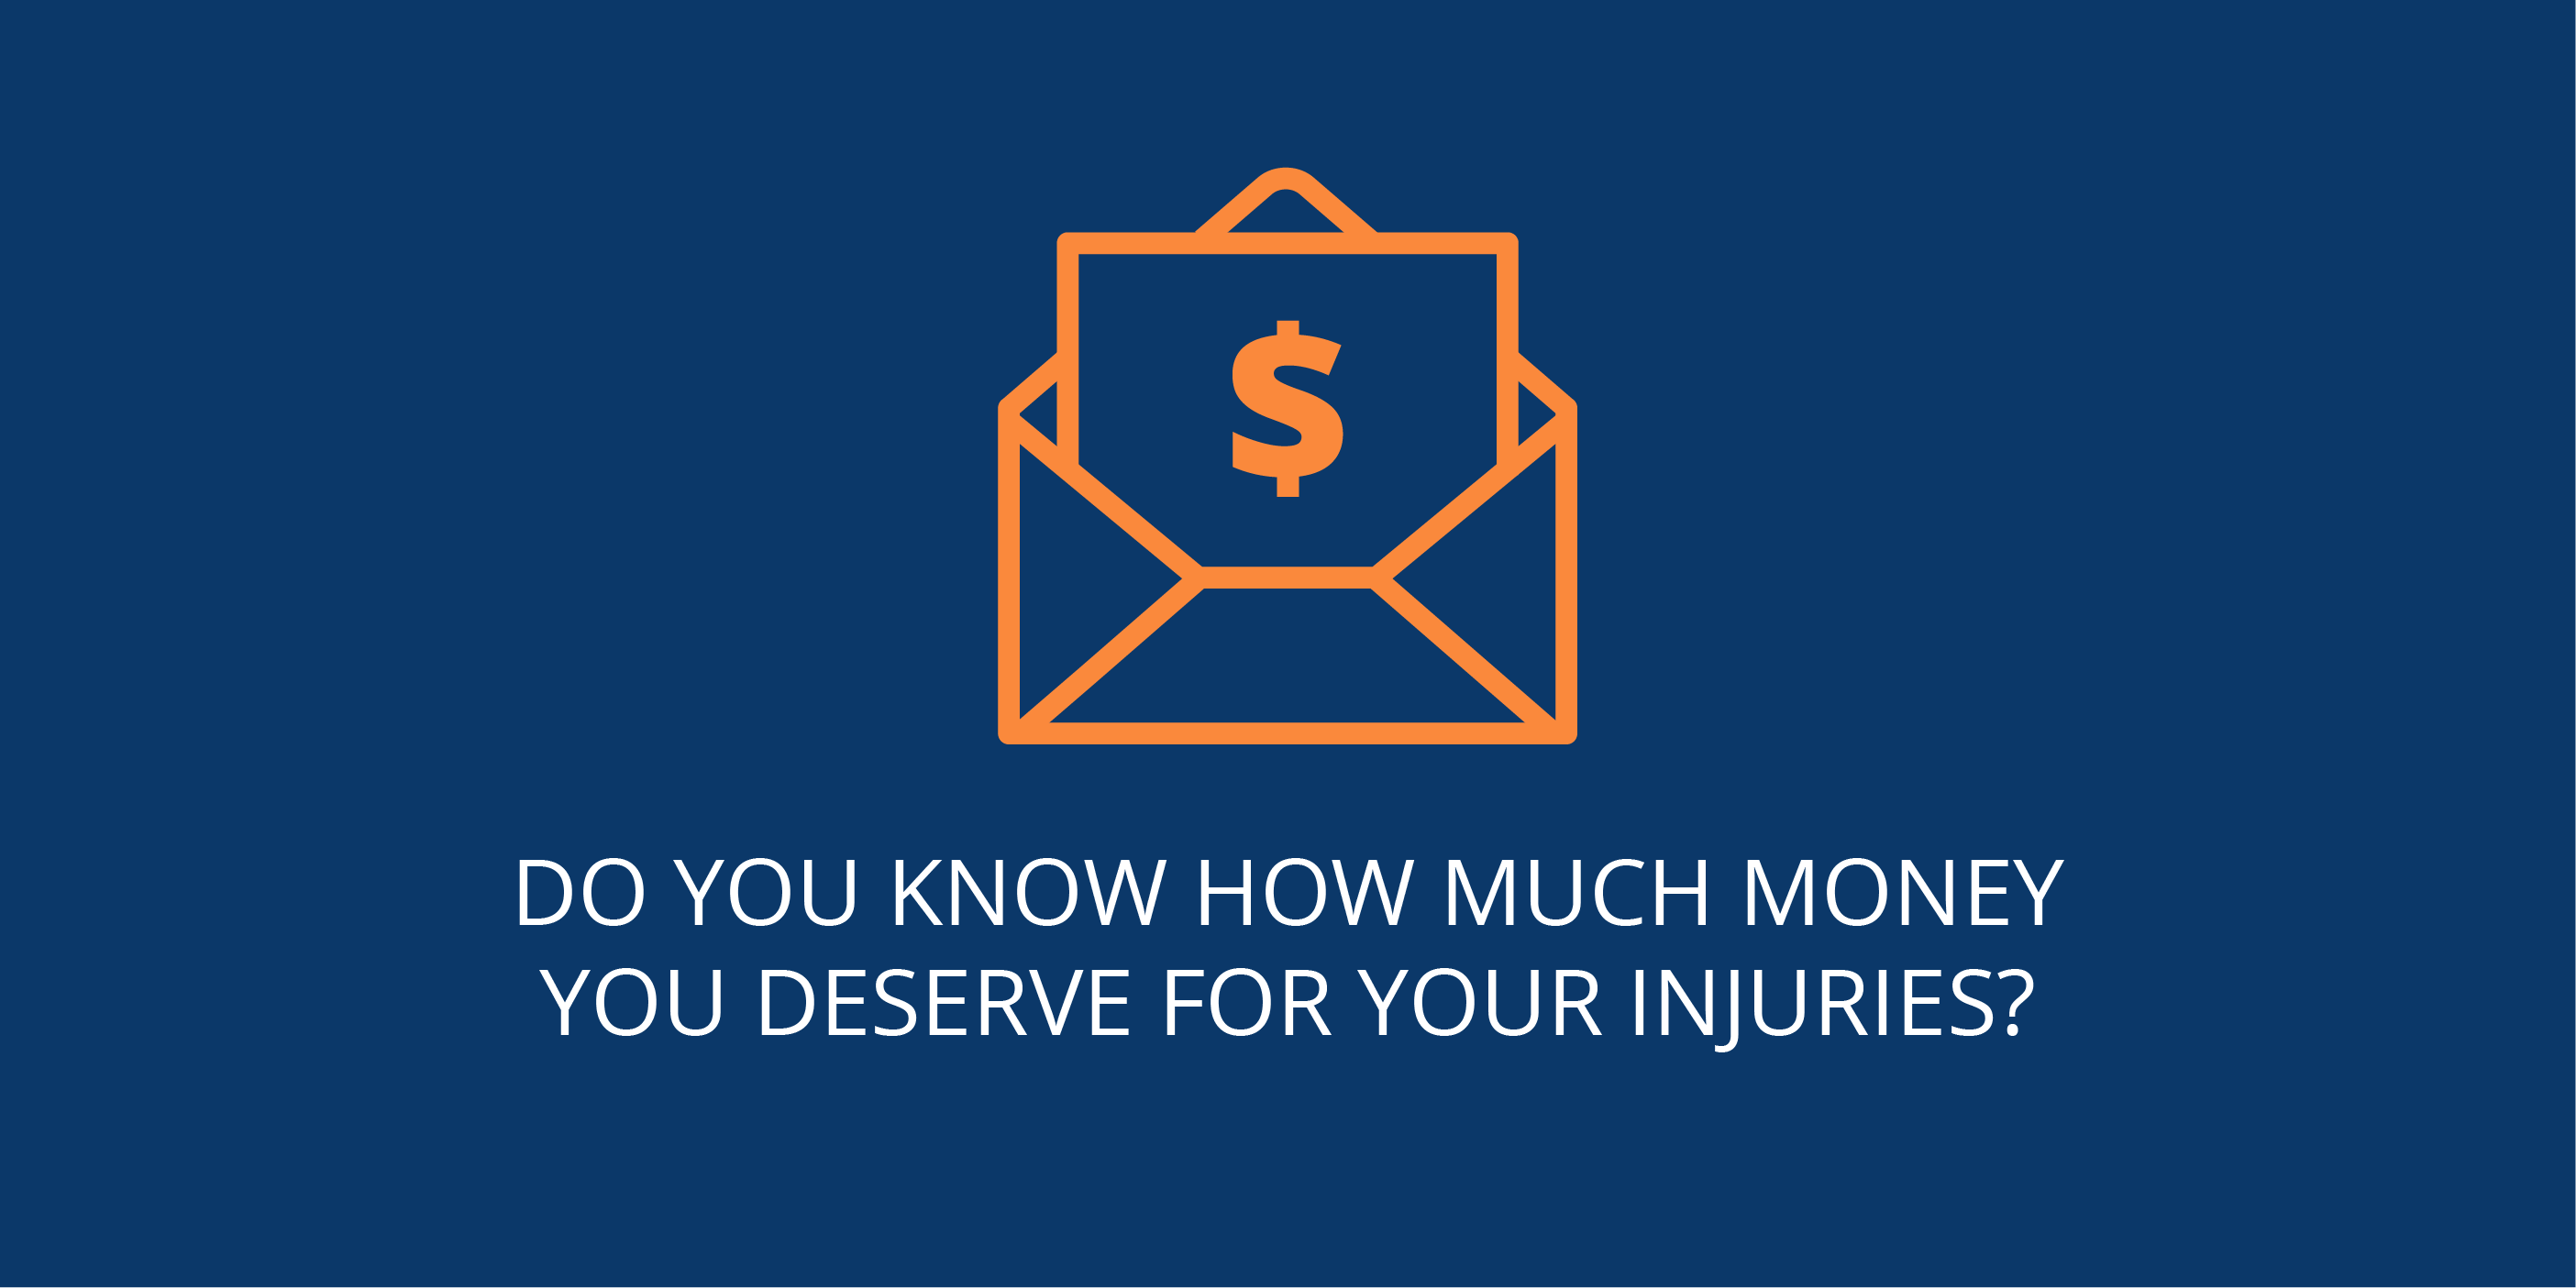 Do you know how much money you deserve for your injuries?